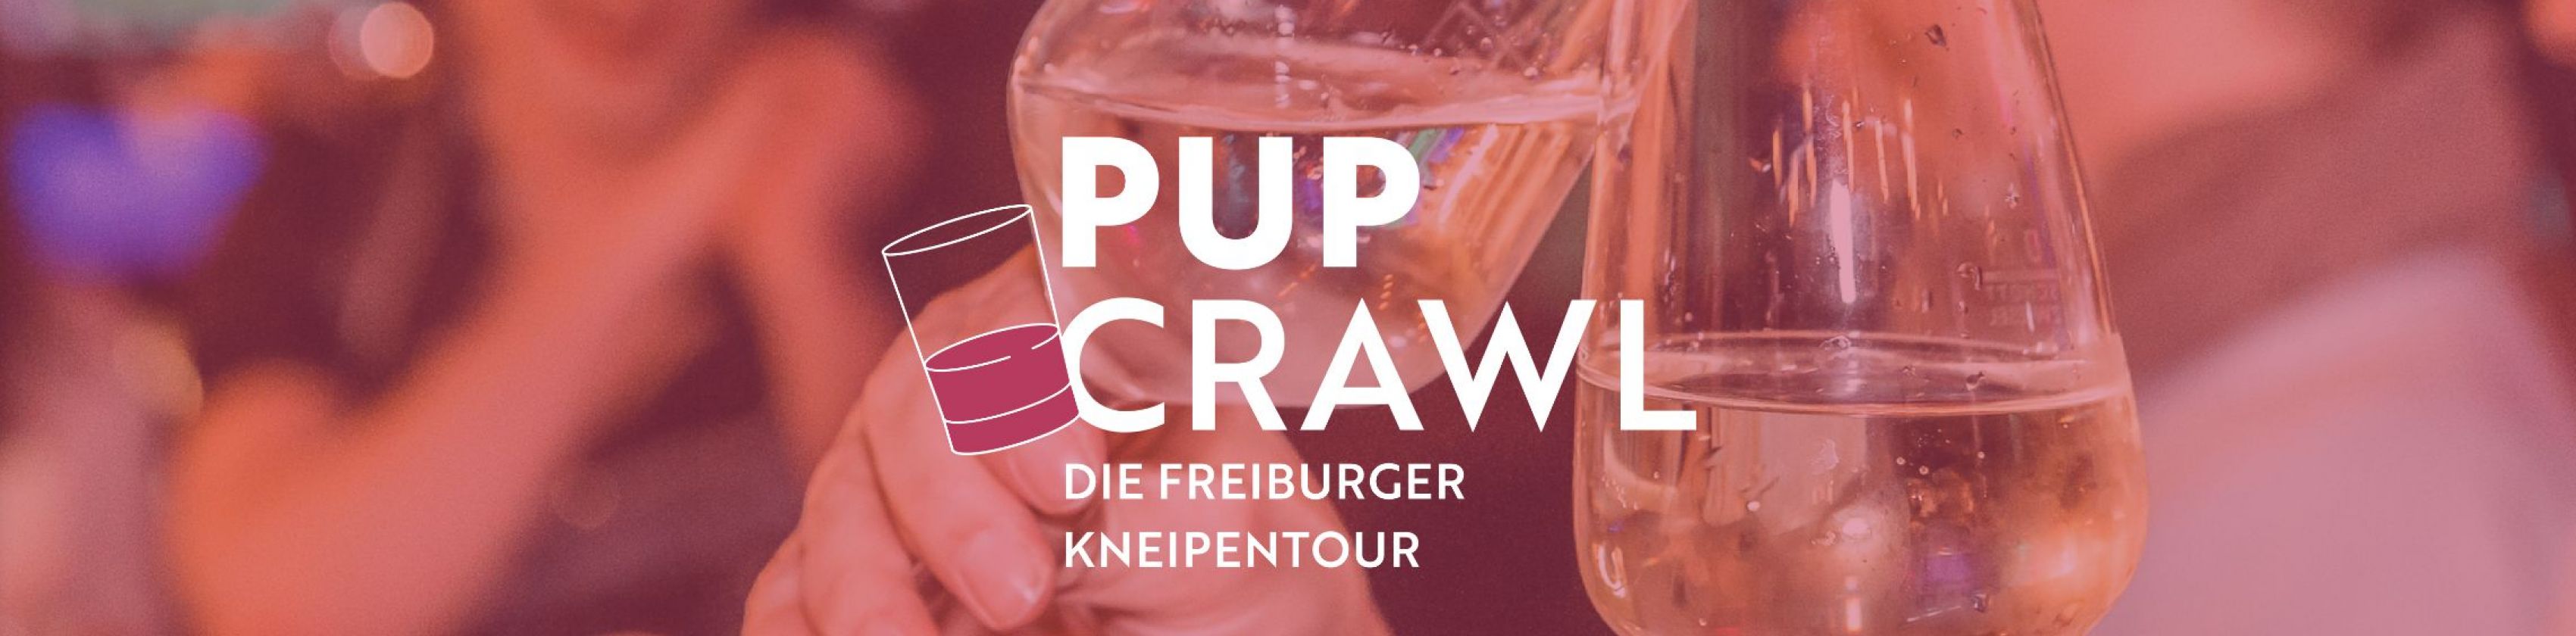 Zig, Zag, Onion, off to Giebel! - The Pub Crawl with the Pub Crawl Guides